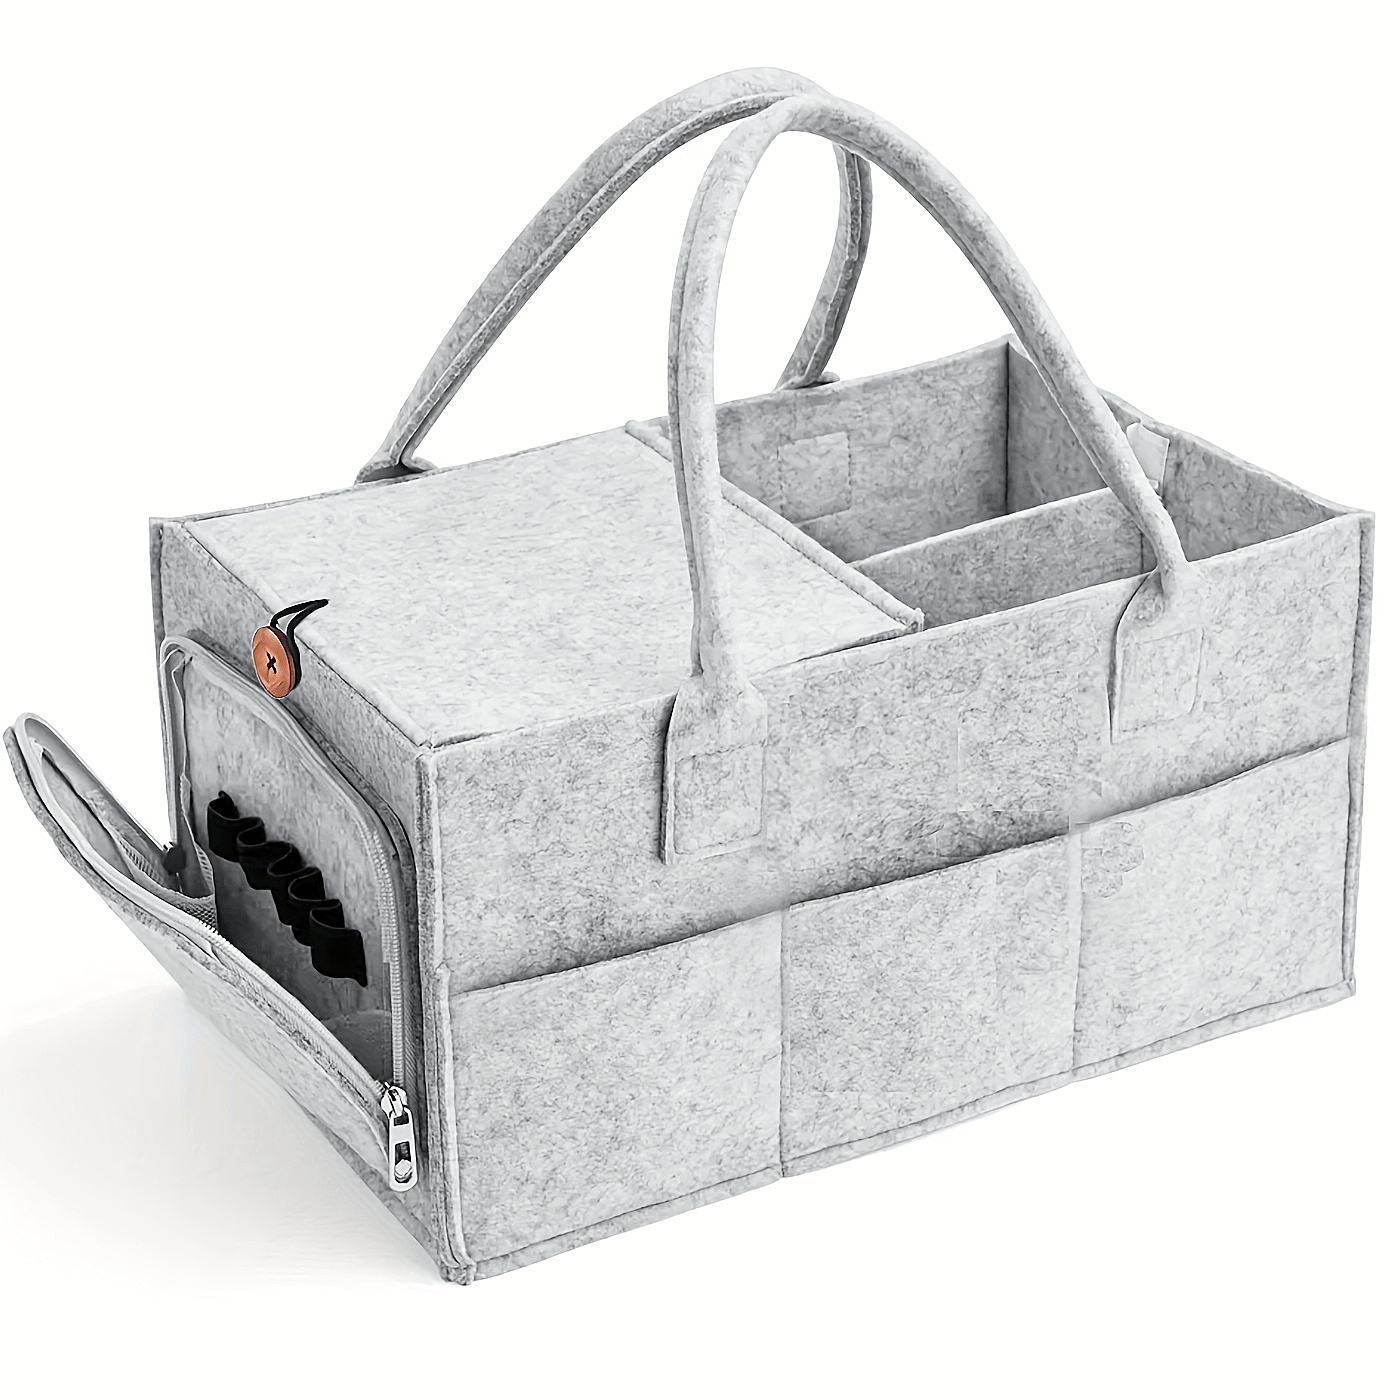 Portable Caddy With Detachable Organizers